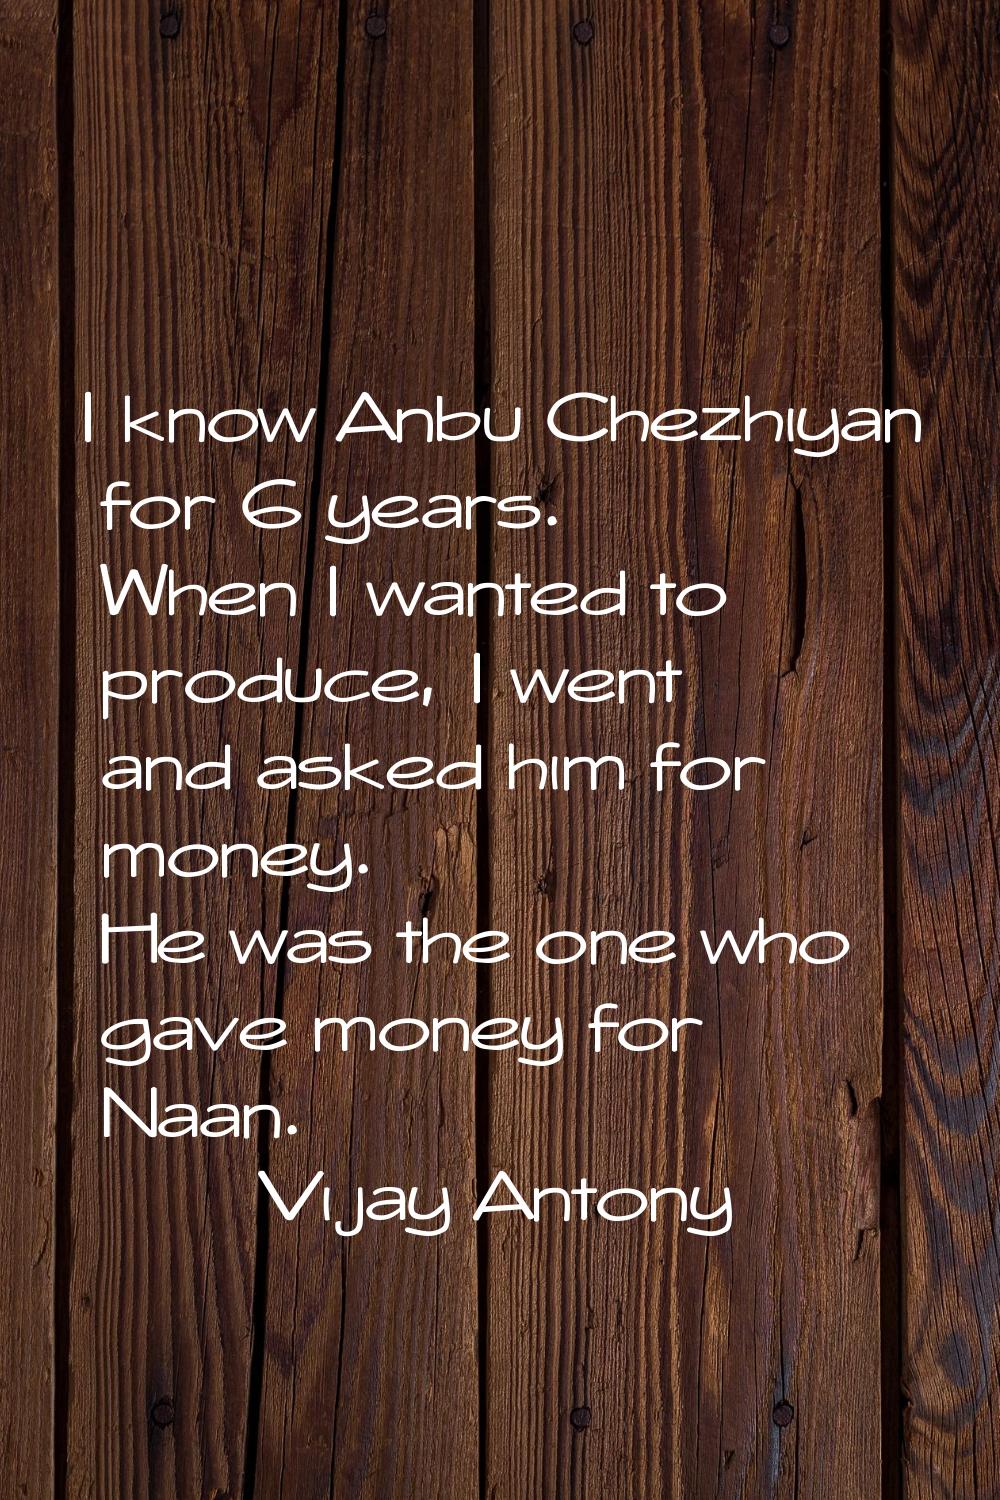 I know Anbu Chezhiyan for 6 years. When I wanted to produce, I went and asked him for money. He was